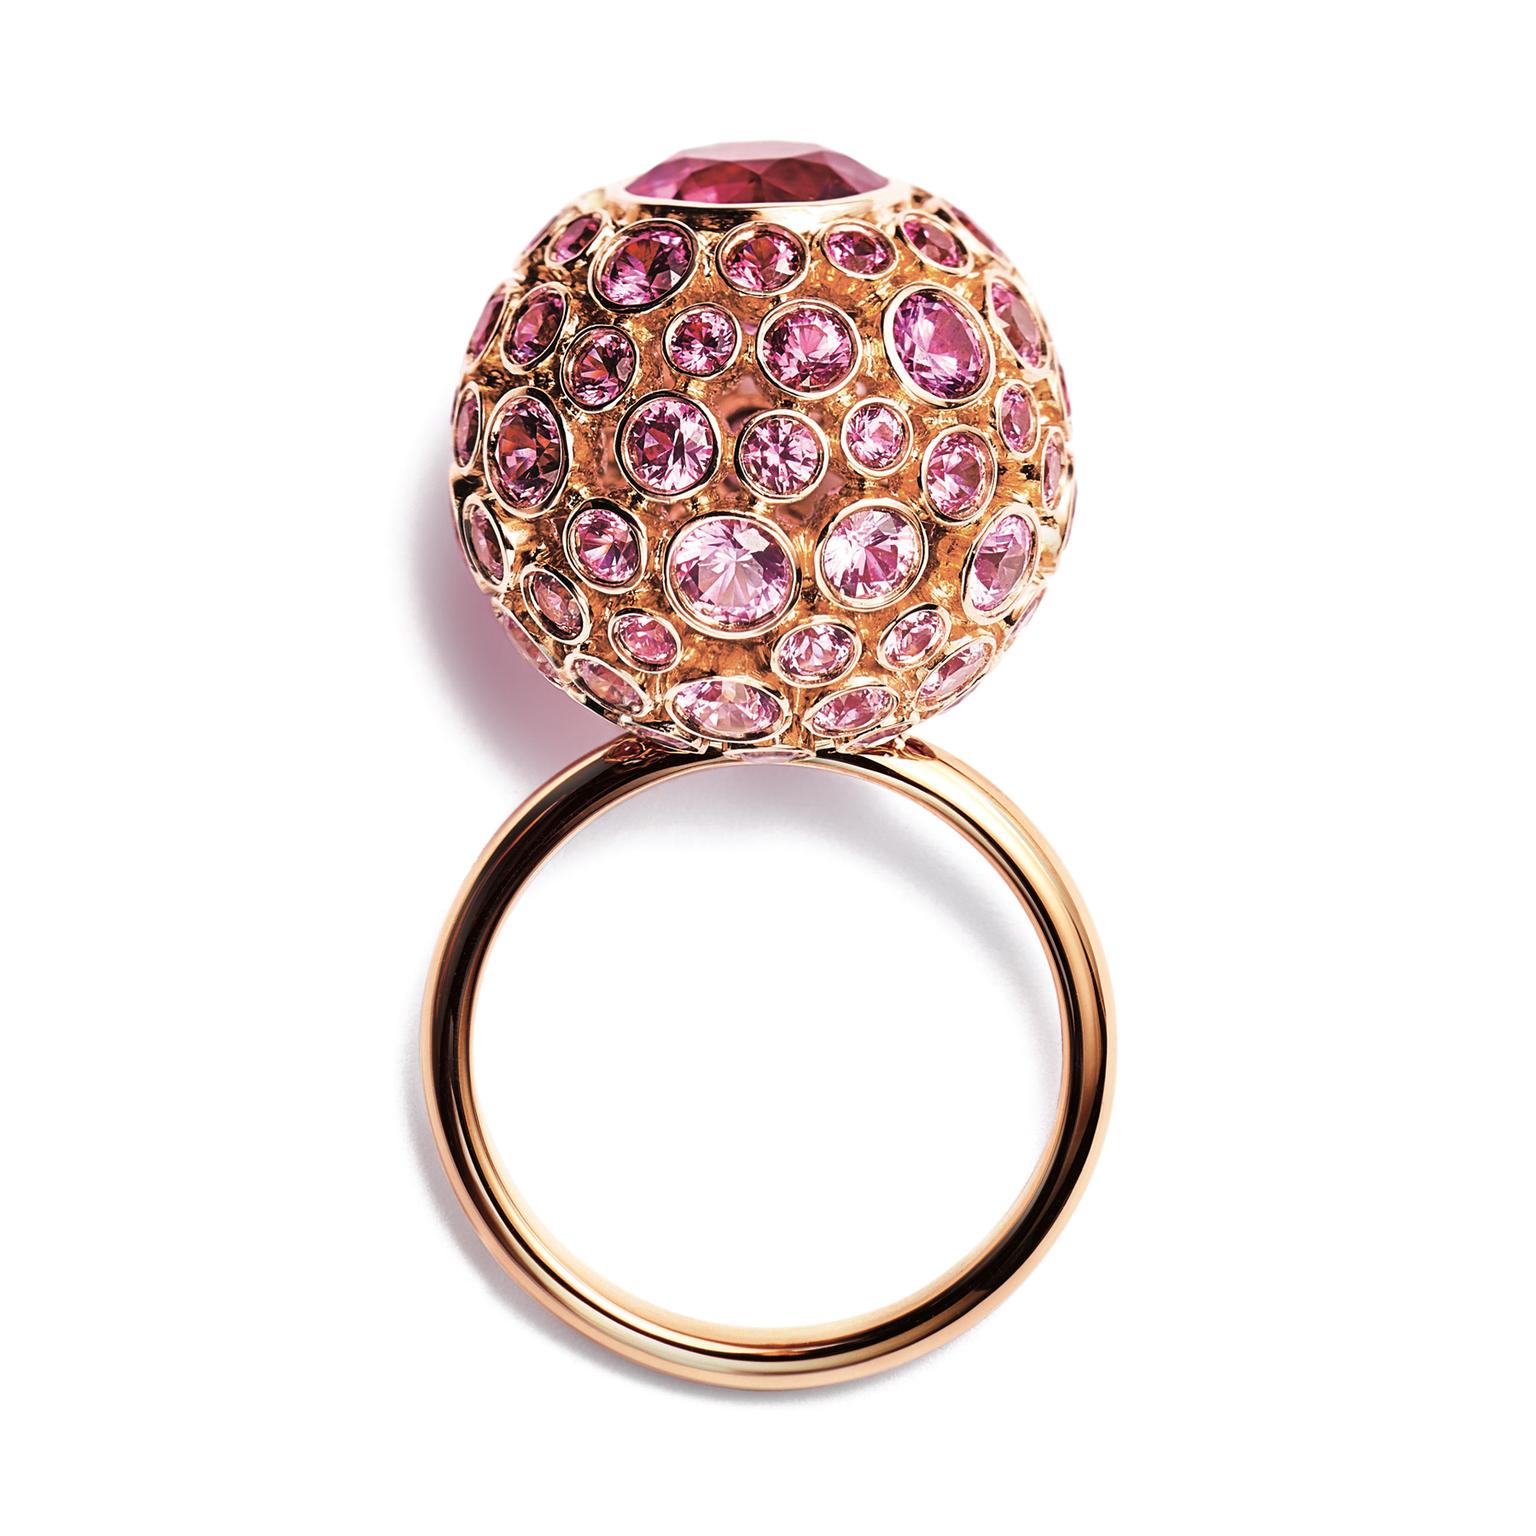 Tiffany Masterpieces Prism pink sapphire ring